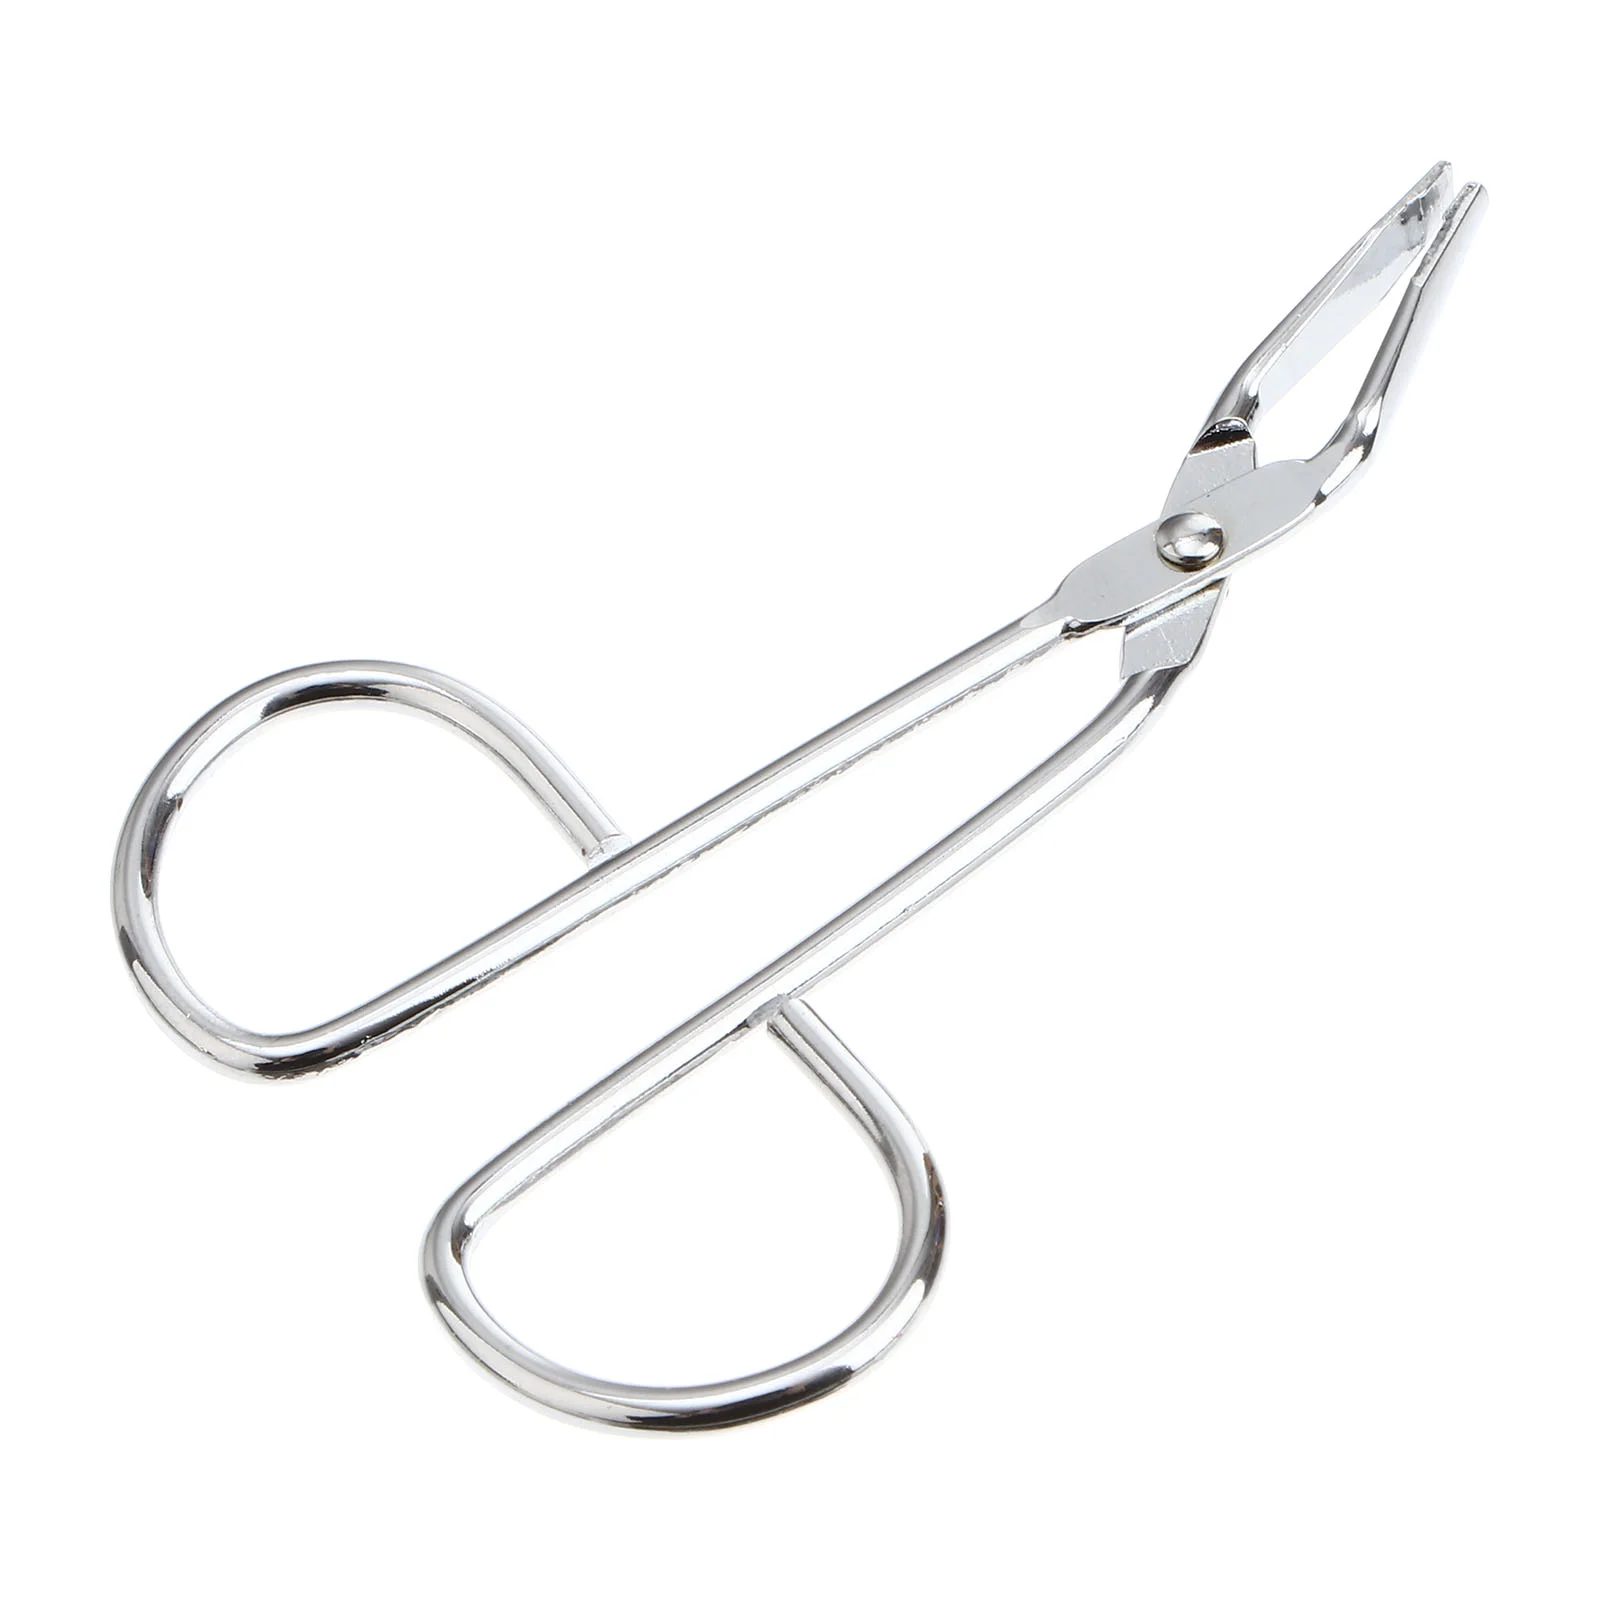 

Eyebrow Hair Scissors Tip Clip Plucker Scissor Brow Handle Remover Flat Nose Women Shaped Facial Straight Stainless Steel